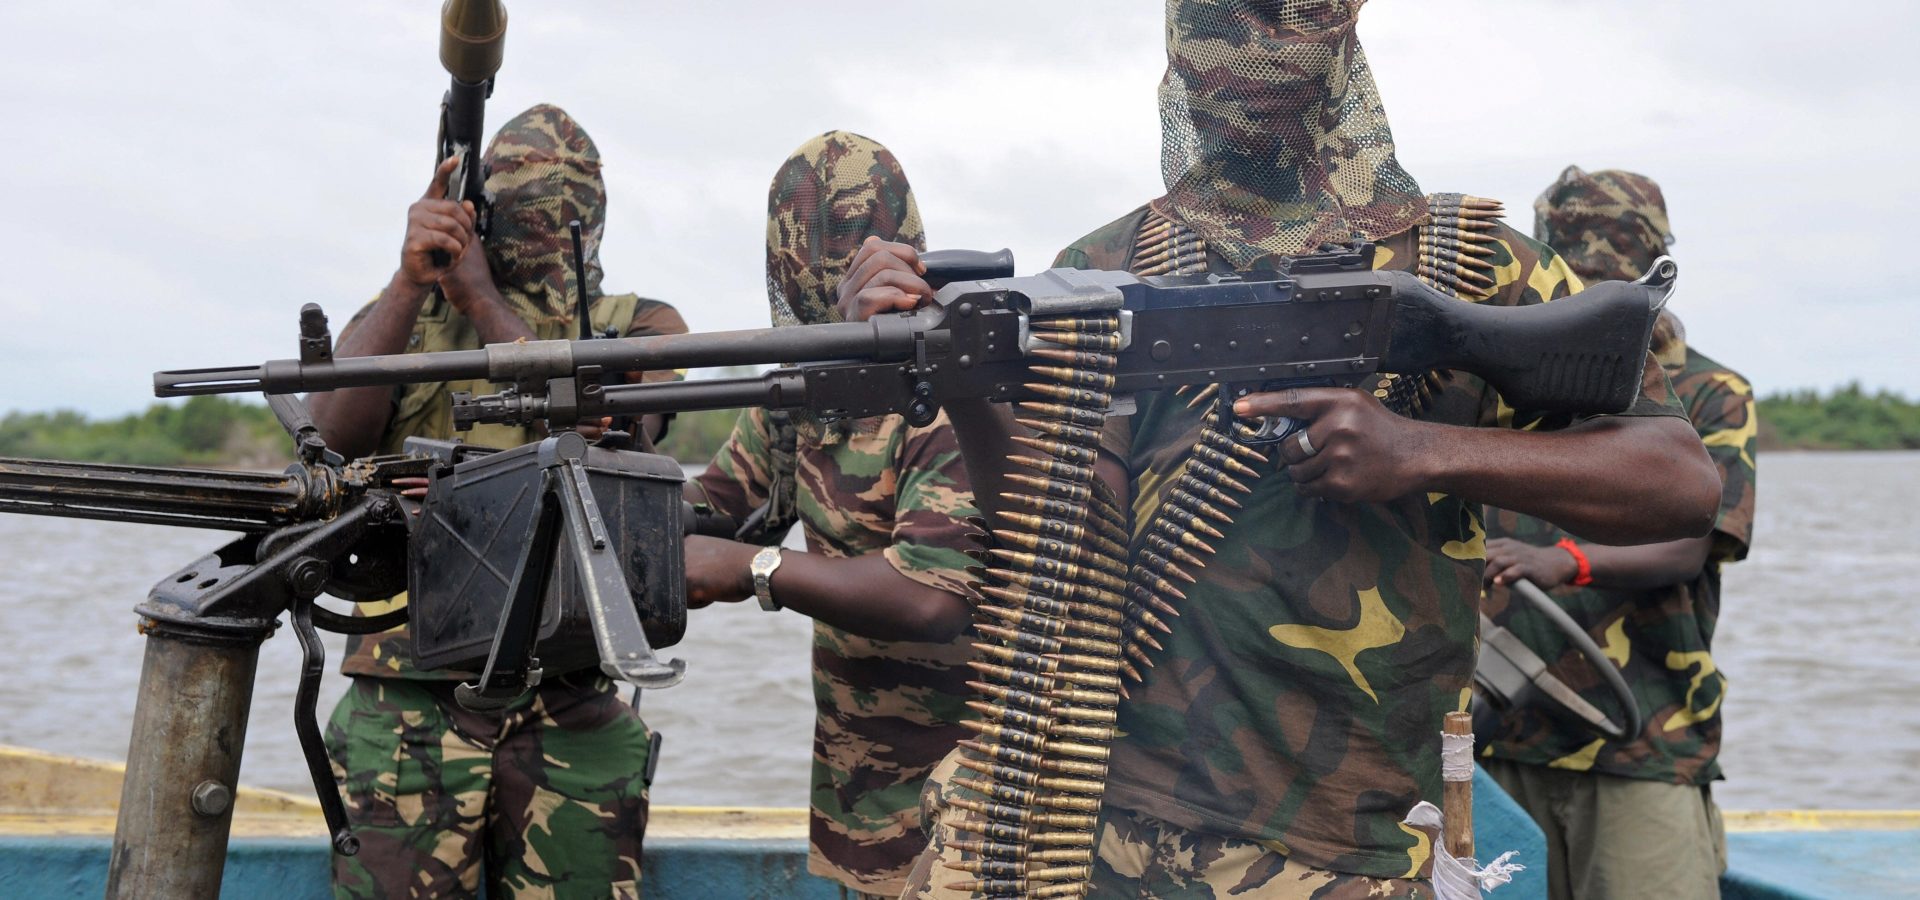 The Niger Delta Militants have been targeting Western oil interests in Nigeria, drawing the ire of US media outlets, quick to dismiss their actions as terrorism.